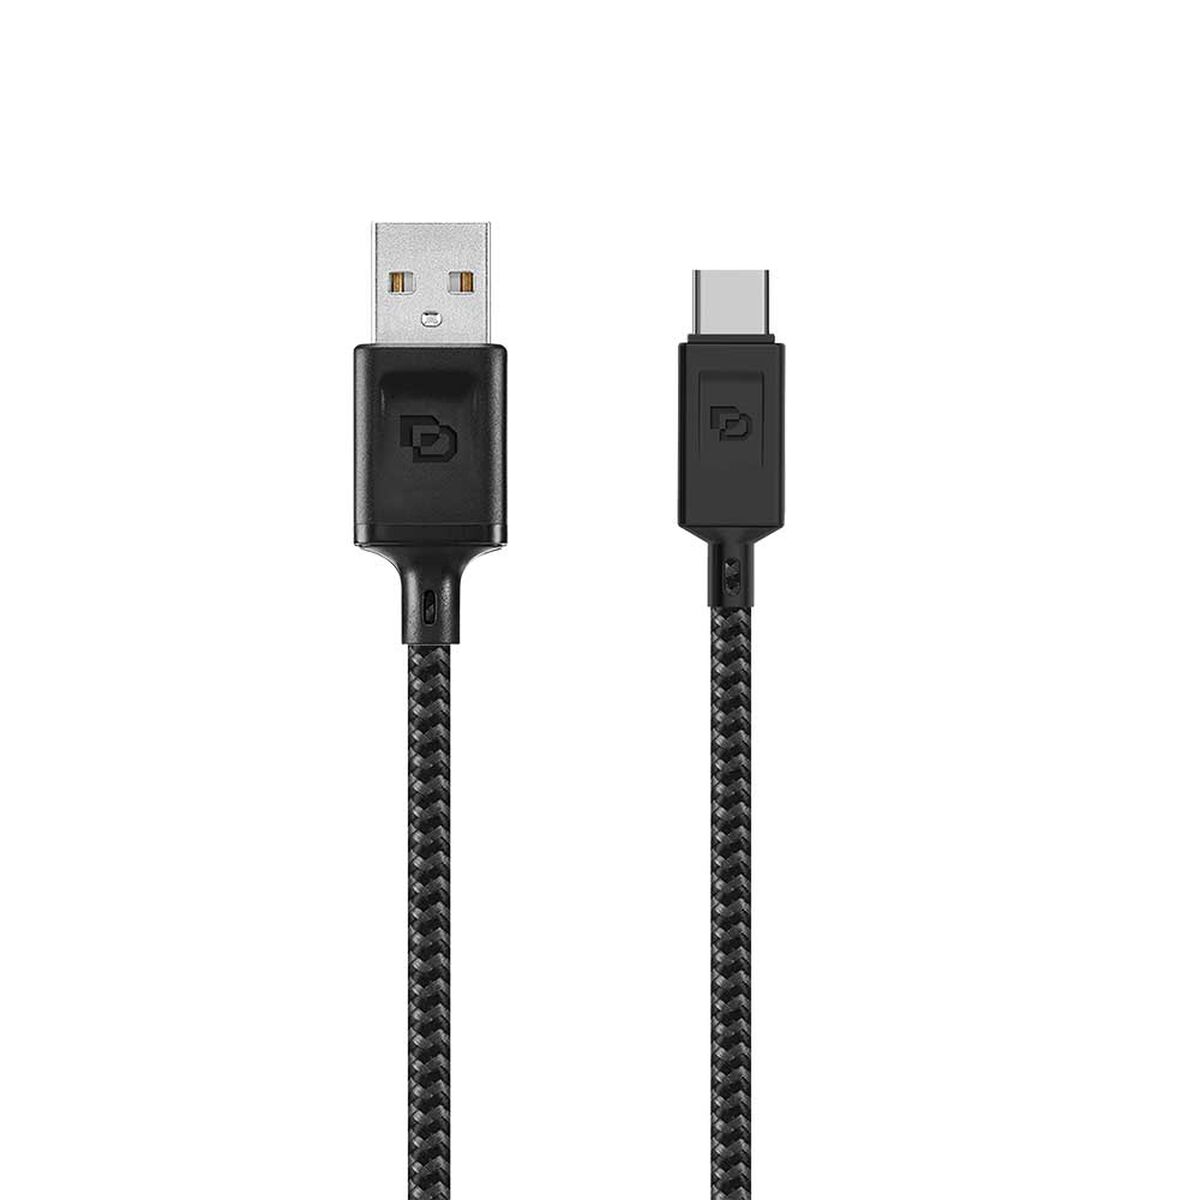 Cable USB Tipo-A a Tipo-C Dusted Negro